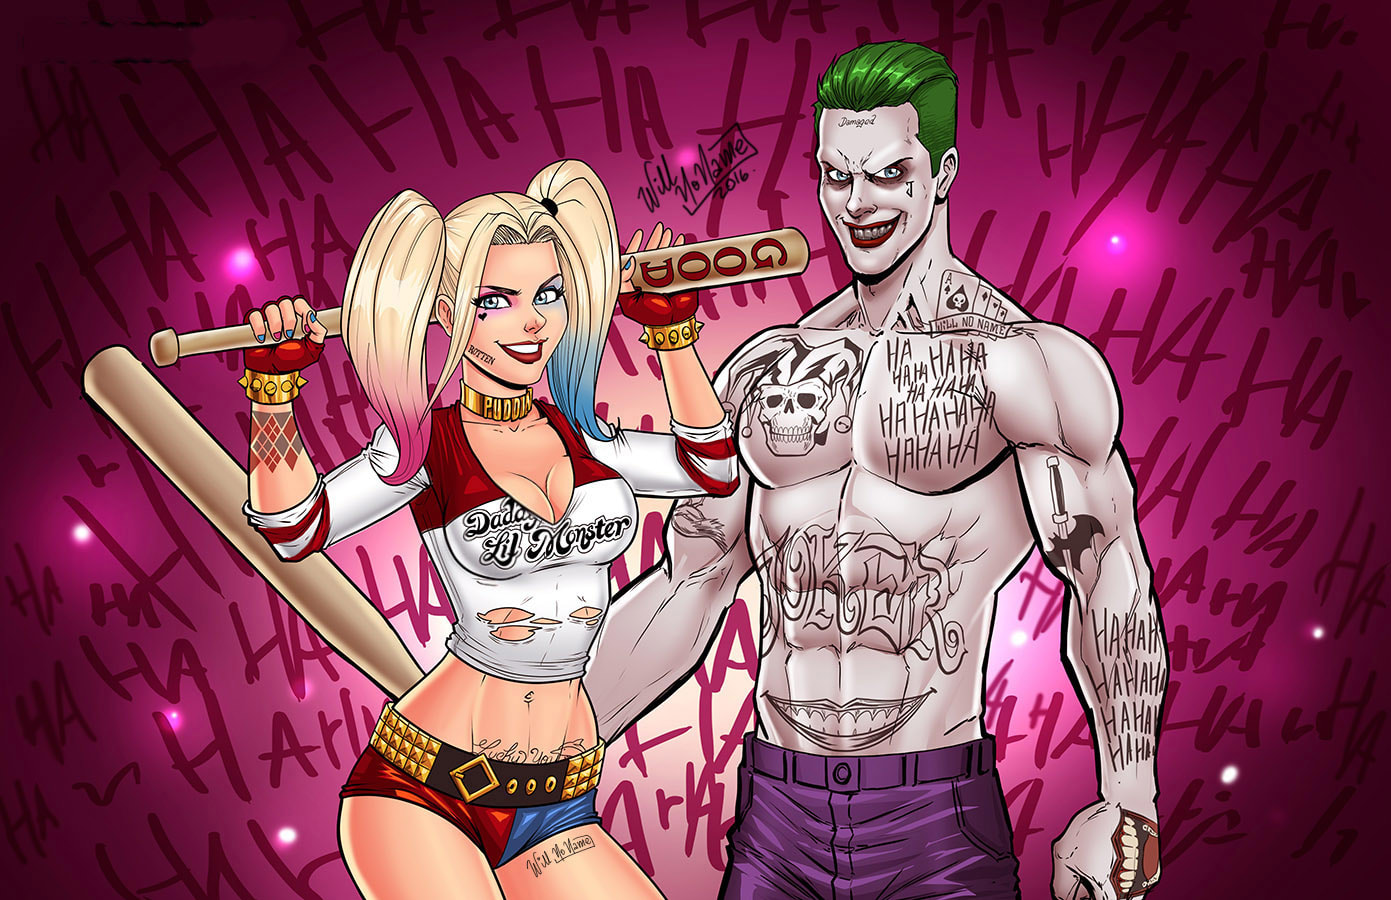 Draw You As Harley Quinn Or The Joker By Willnoname Fiverr